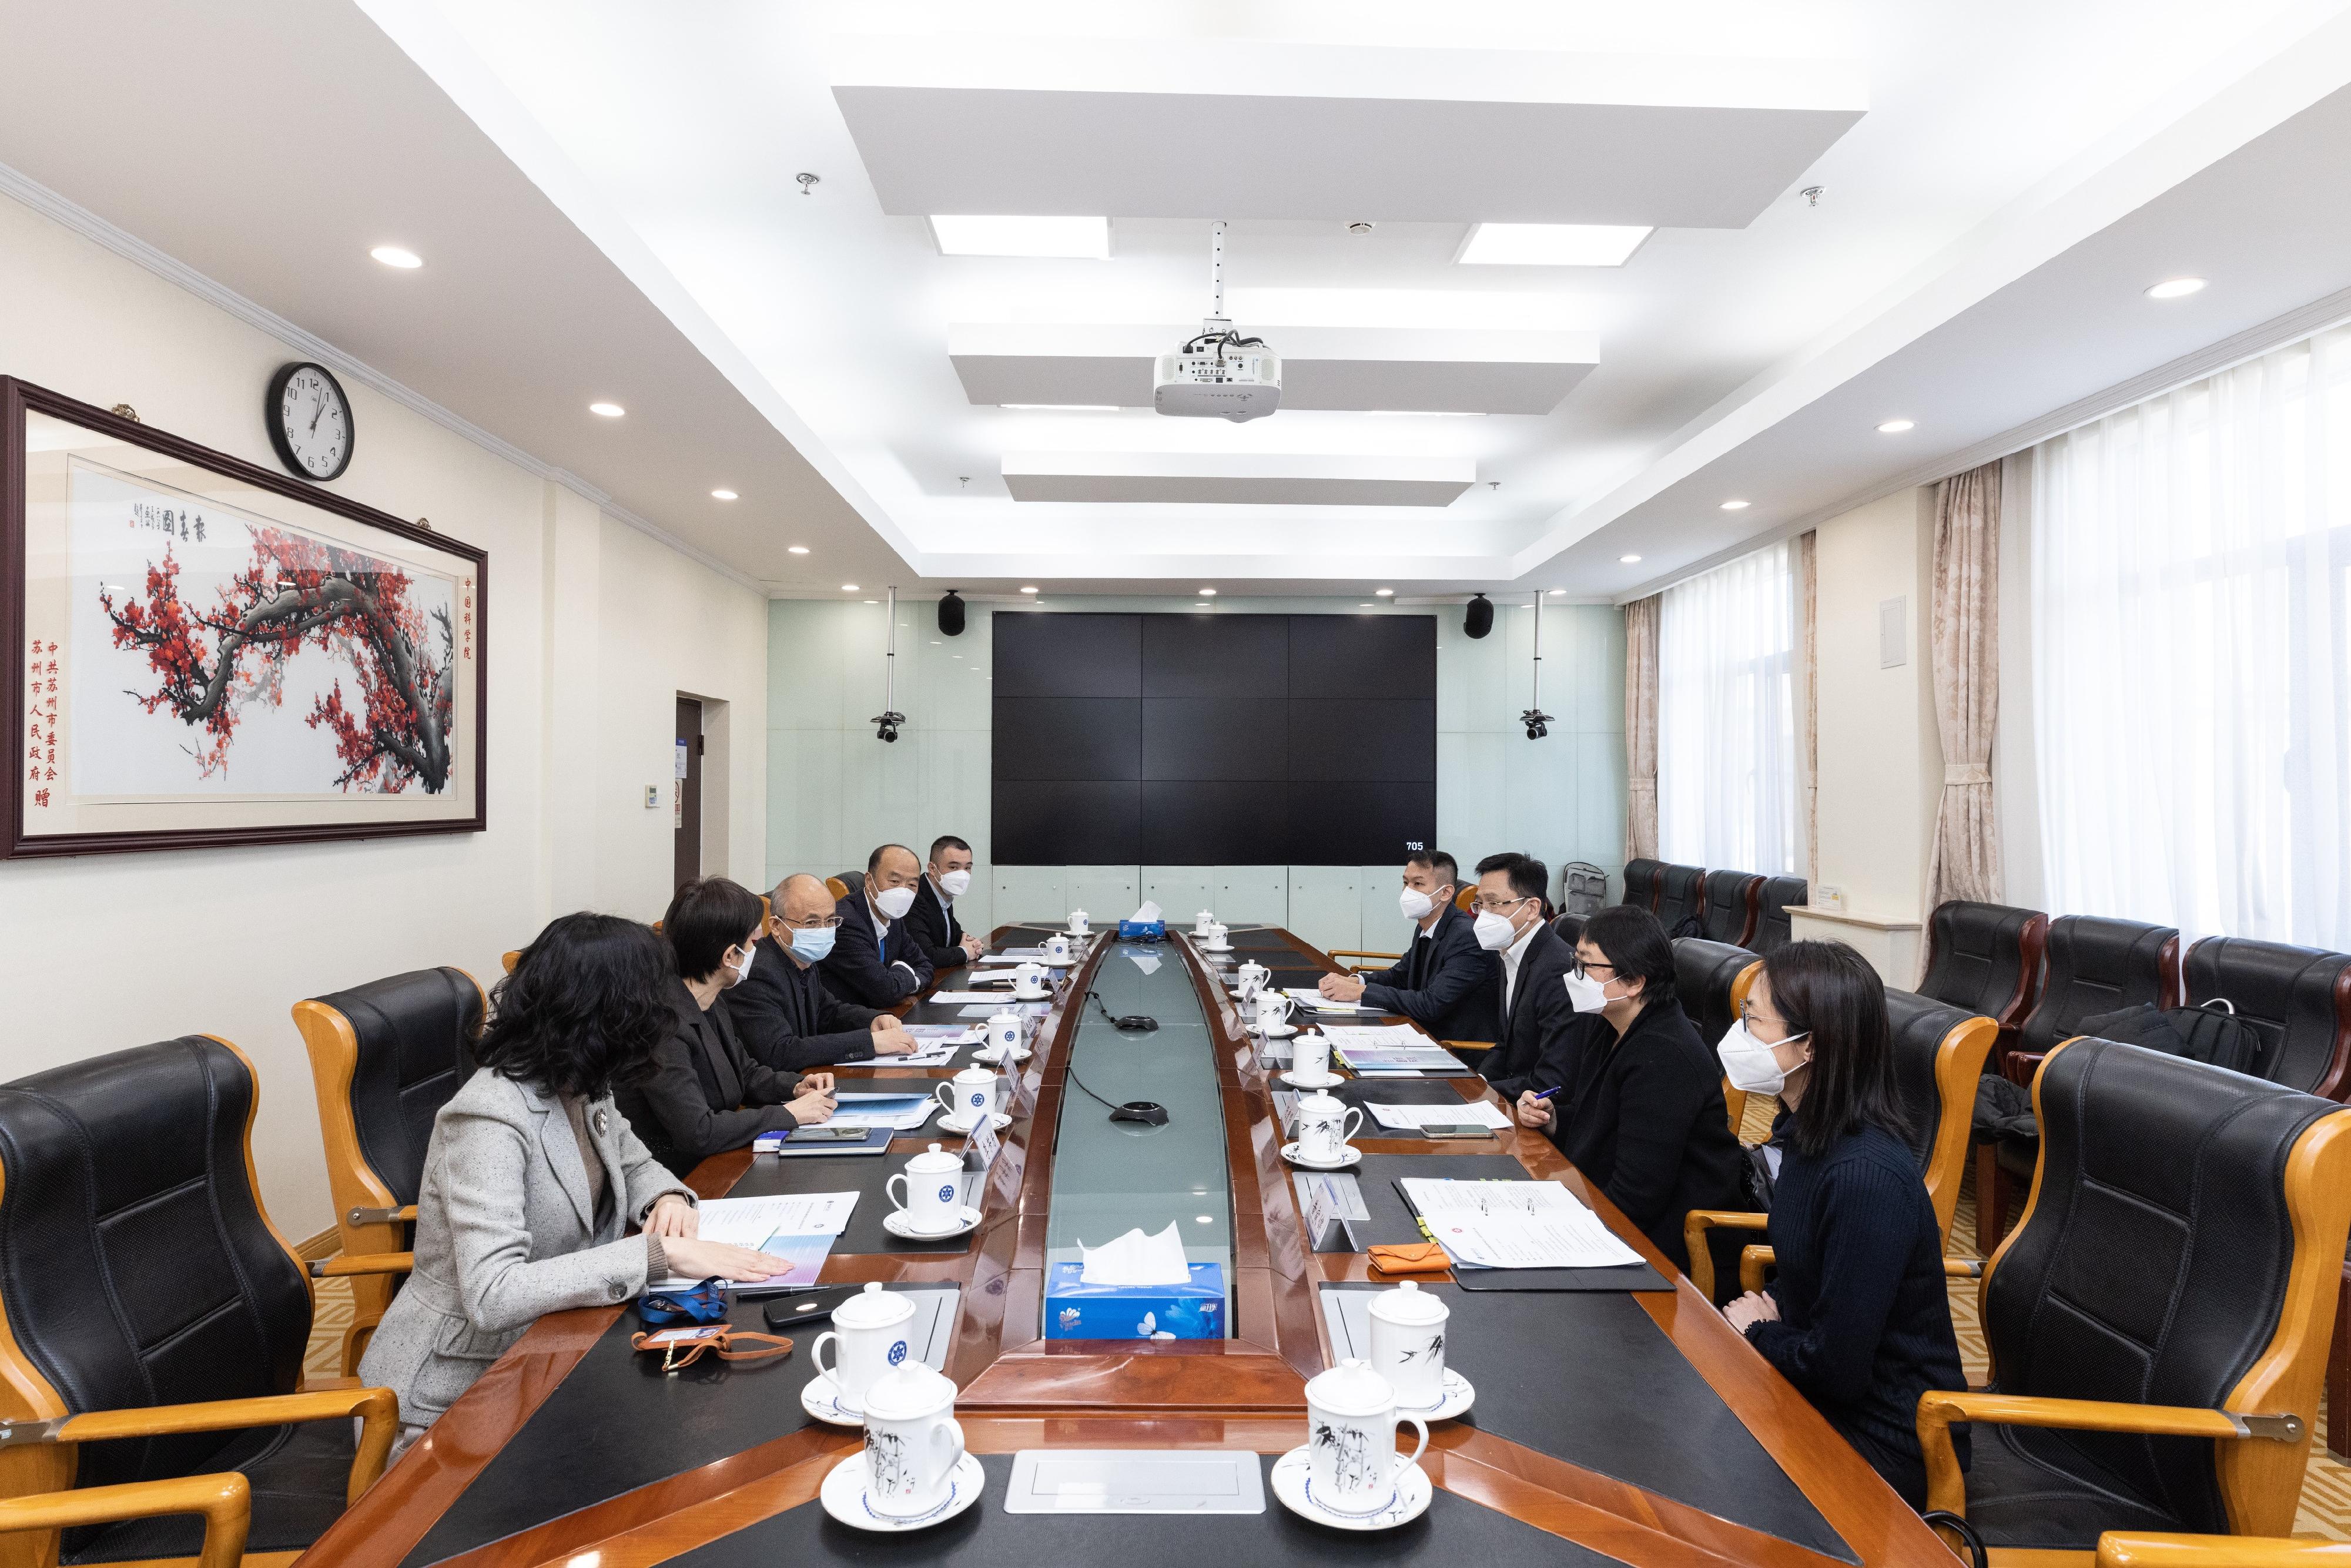 The Secretary for Innovation, Technology and Industry, Professor Sun Dong (third right), visits the Chinese Academy of Sciences (CAS) in Beijing today (January 16) and gives an overview to Vice President of the CAS Mr Zhang Yaping (third left) on the latest innovation and technology development of Hong Kong.